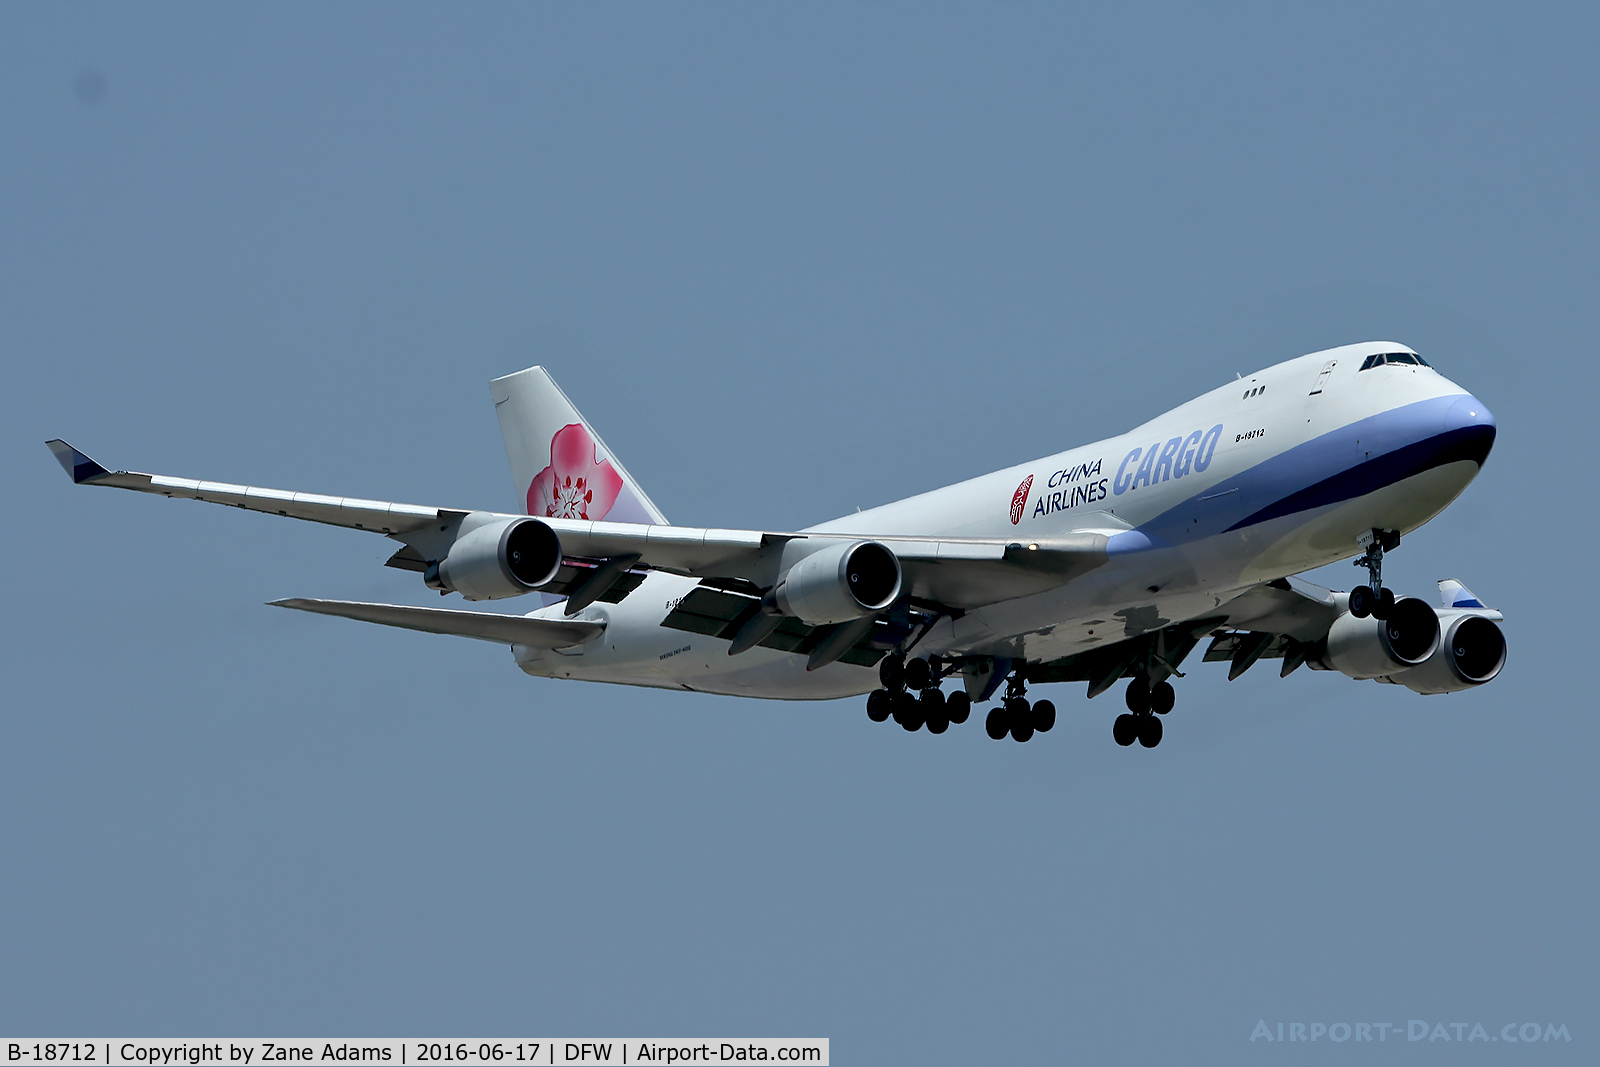 B-18712, 2003 Boeing 747-409F/SCD C/N 33729, Arriving at DFW Airport